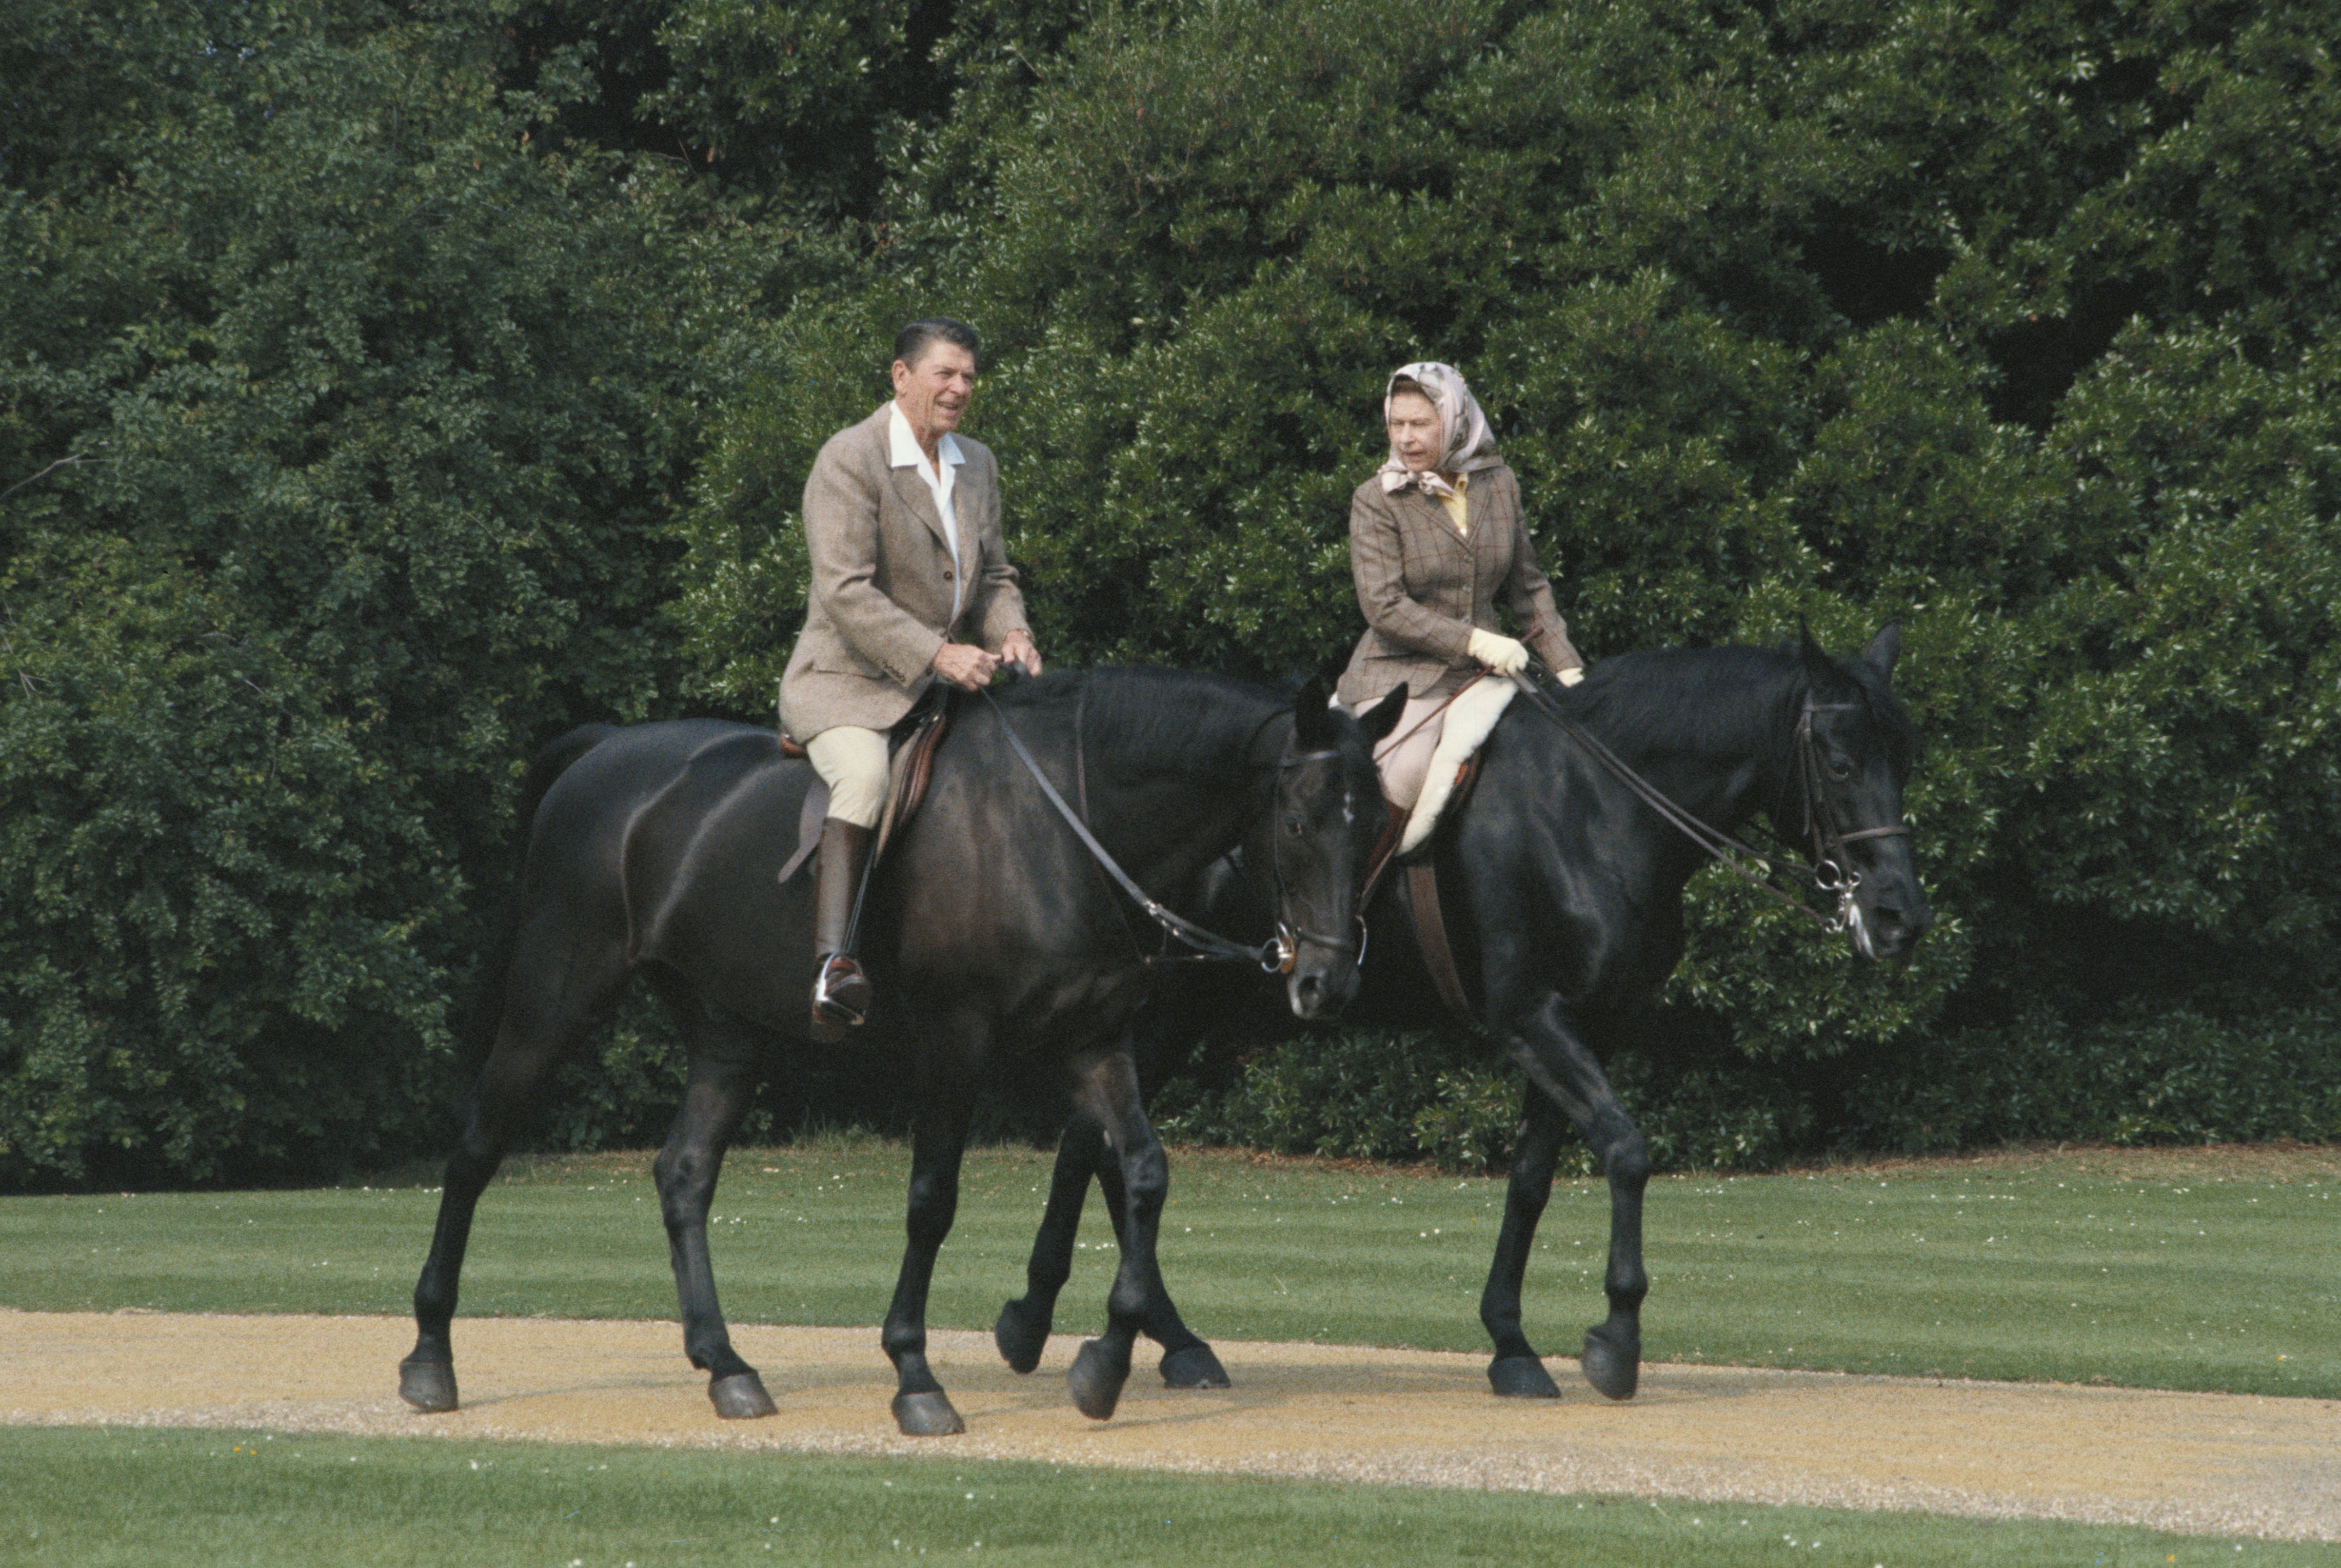 Queen Elizabeth II riding in the grounds of Windsor Castle with US President Ronald Reagan, during his state visit to the UK, 8th June 1982. (Georges De Keerle/Getty Images)